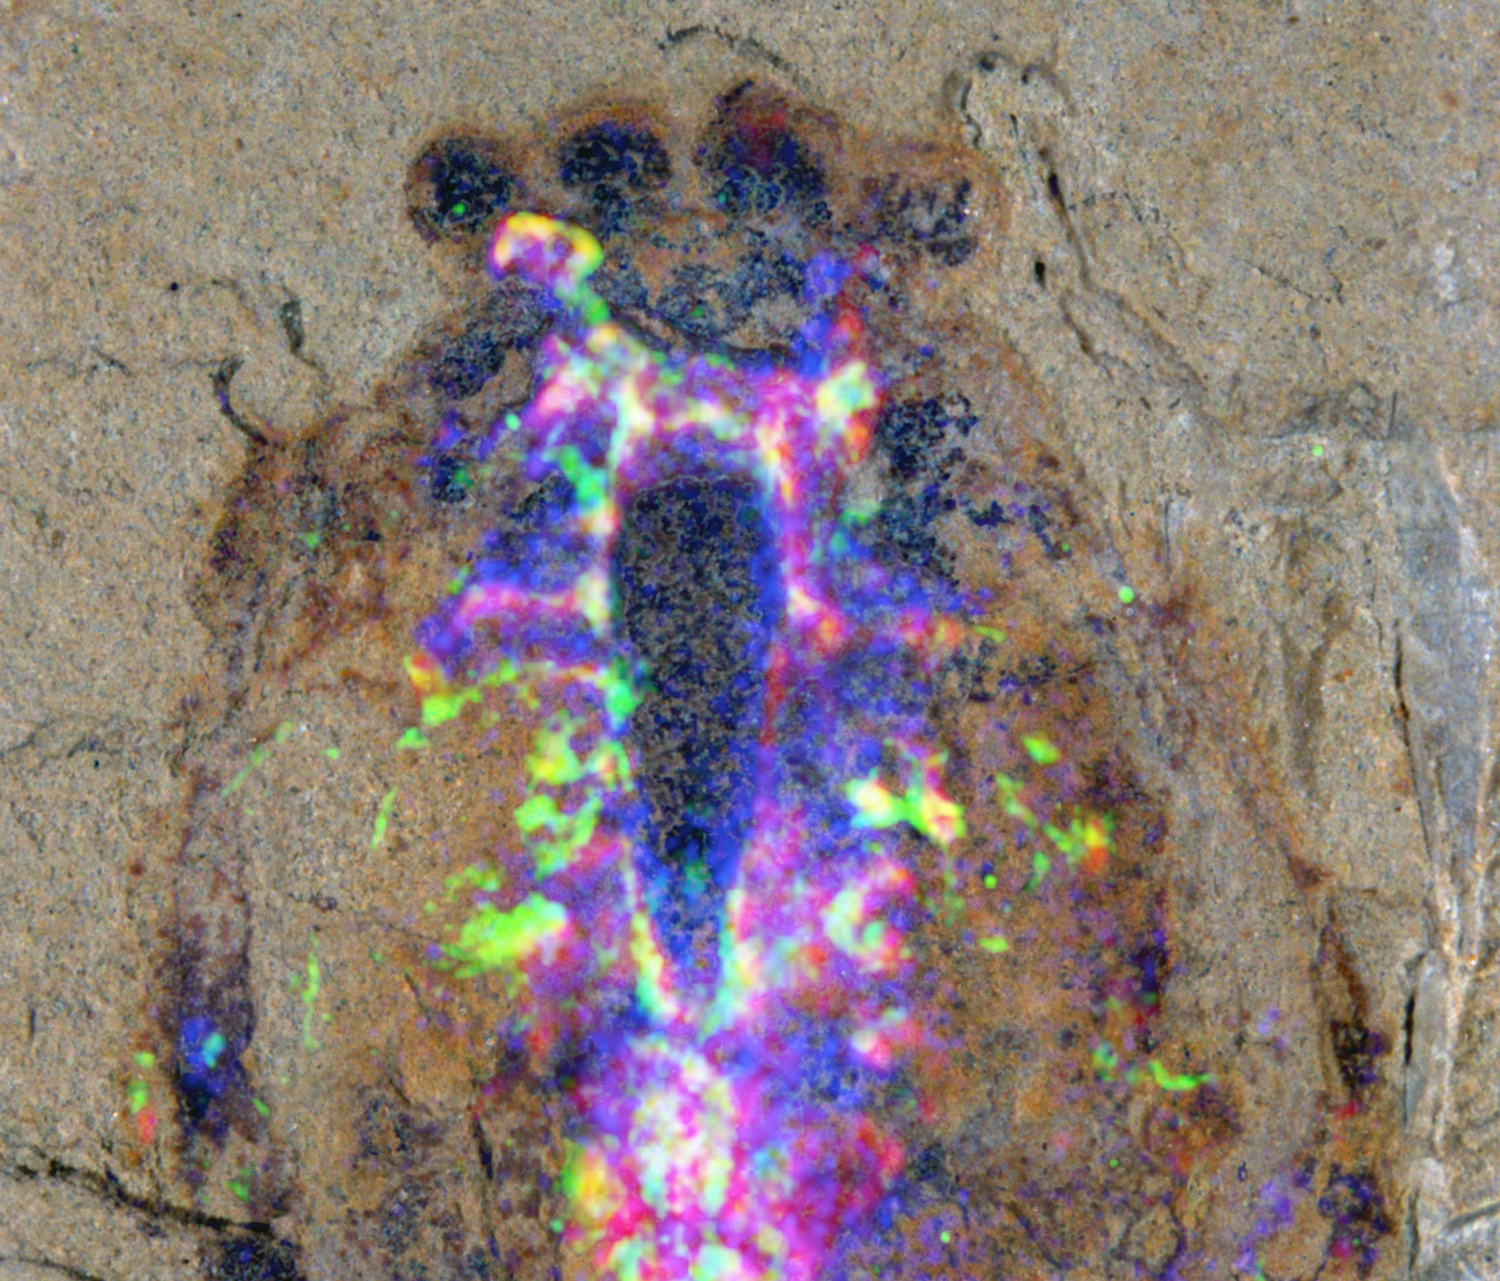 A close-up of the Alalcomenaeus fossil head region superimposed with colors from a microscopy imaging technique that shows the distribution of chemical elements in the fossil. Copper shows up as blue, iron as magenta and the CT scans as green. The coincidence of iron and CT denote nervous system. The ball-shaped structures at the top are two pairs of eyes. Image credit: N. Strausfeld et al./Univ. of Arizona.